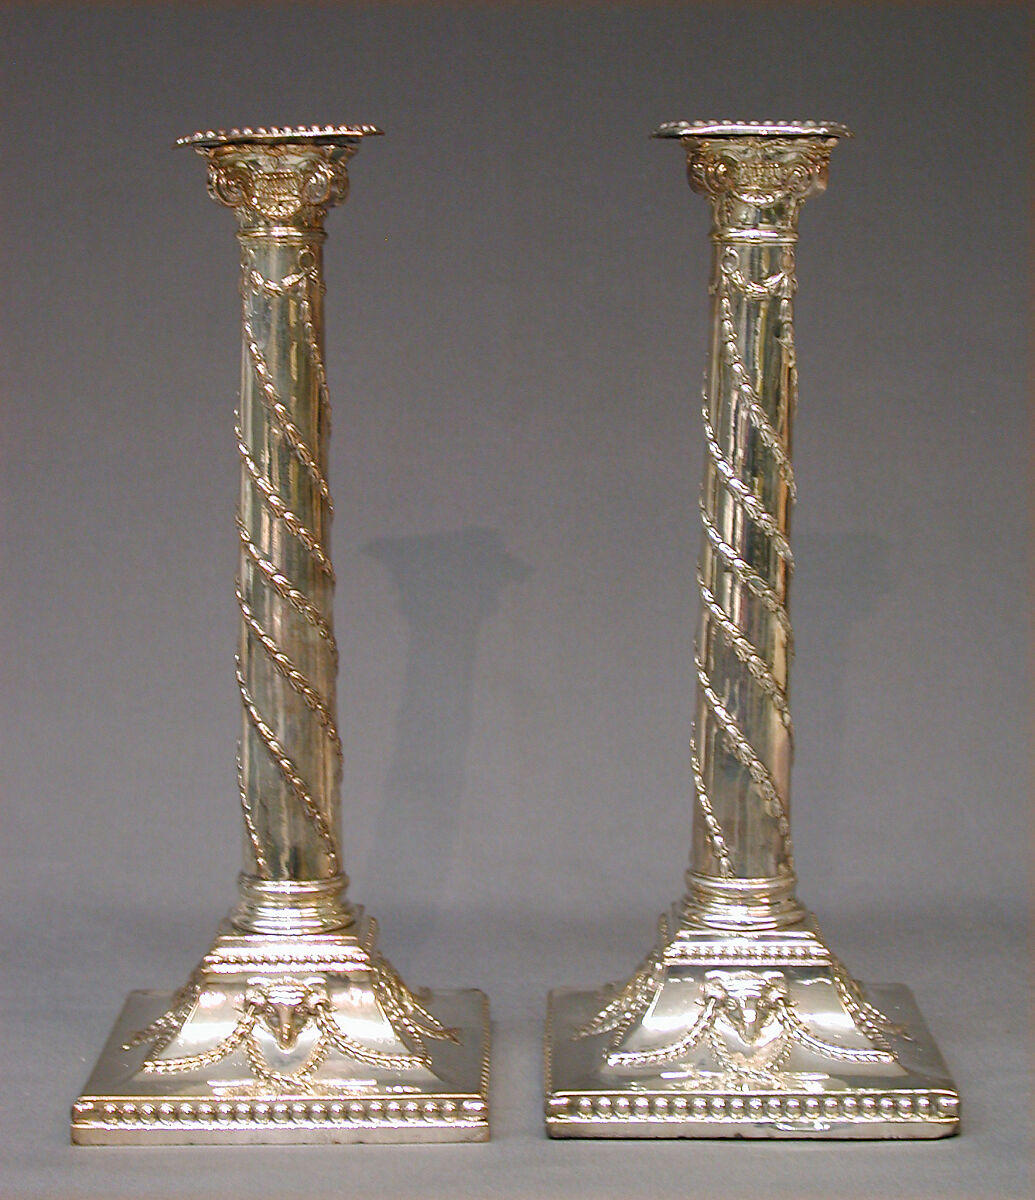 Pair of candlesticks, Probably by Tudor and Leader, Sheffield plate, British, Sheffield 